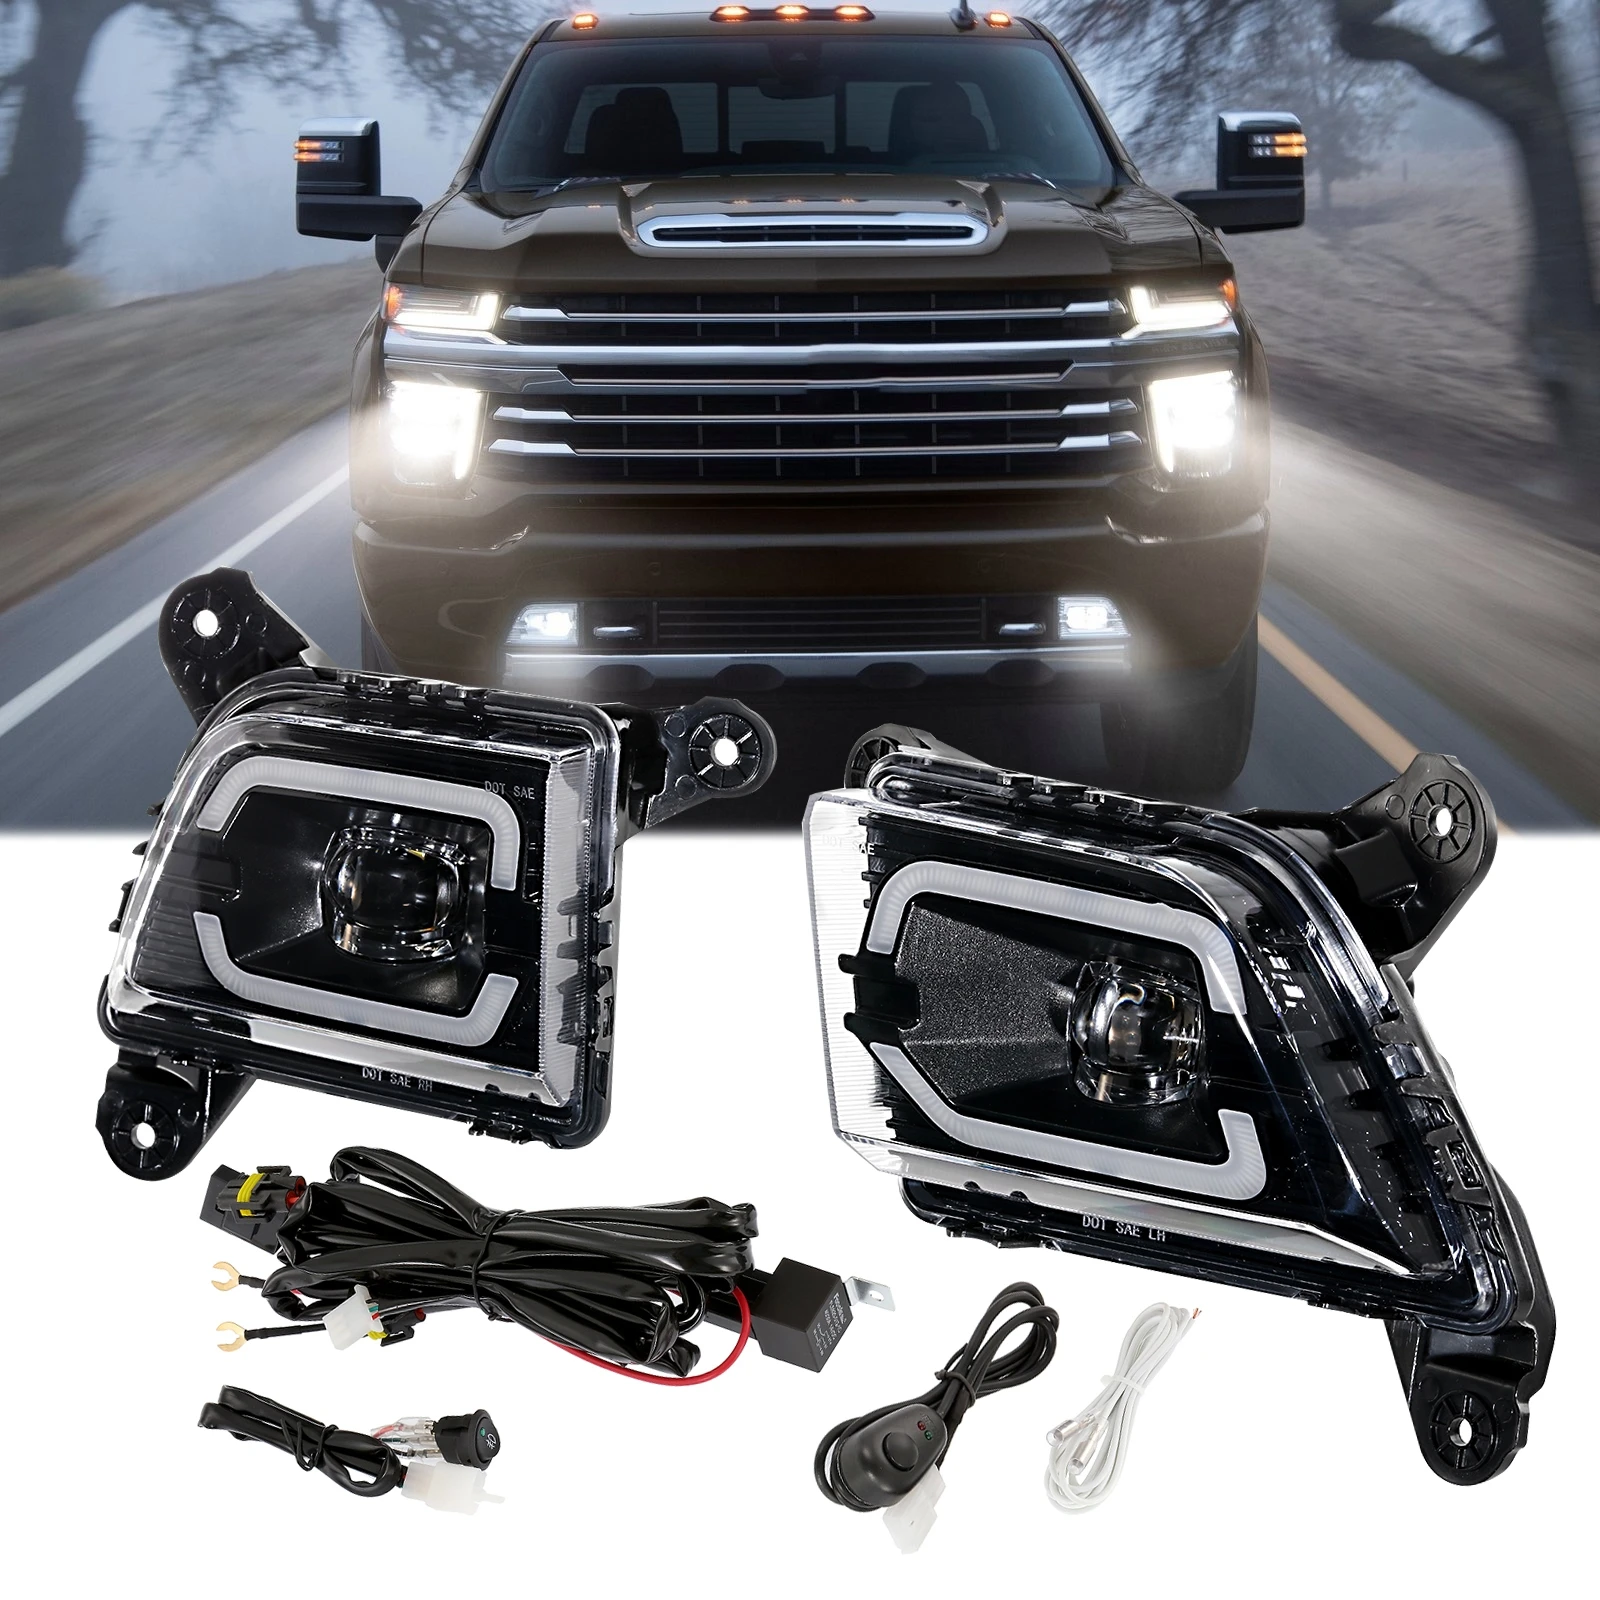 

For Chevy Silverado 1500 2019-2021 LED Fog Light with Daytime Running Lights DRL Driving Passing Fog Lamp w/ Wire Harness